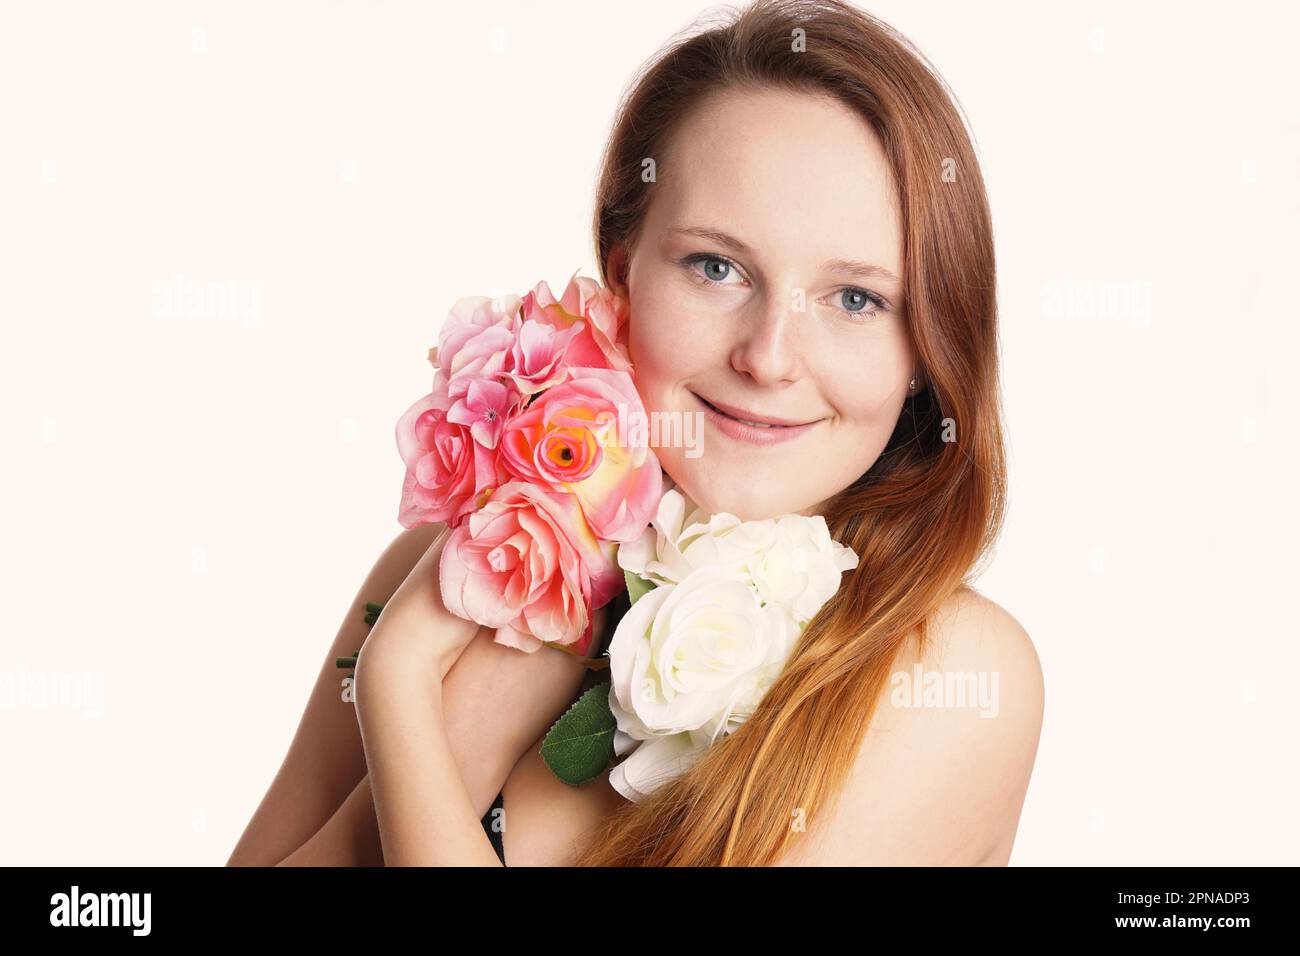 portrait of a young woman with flowers Stock Photo